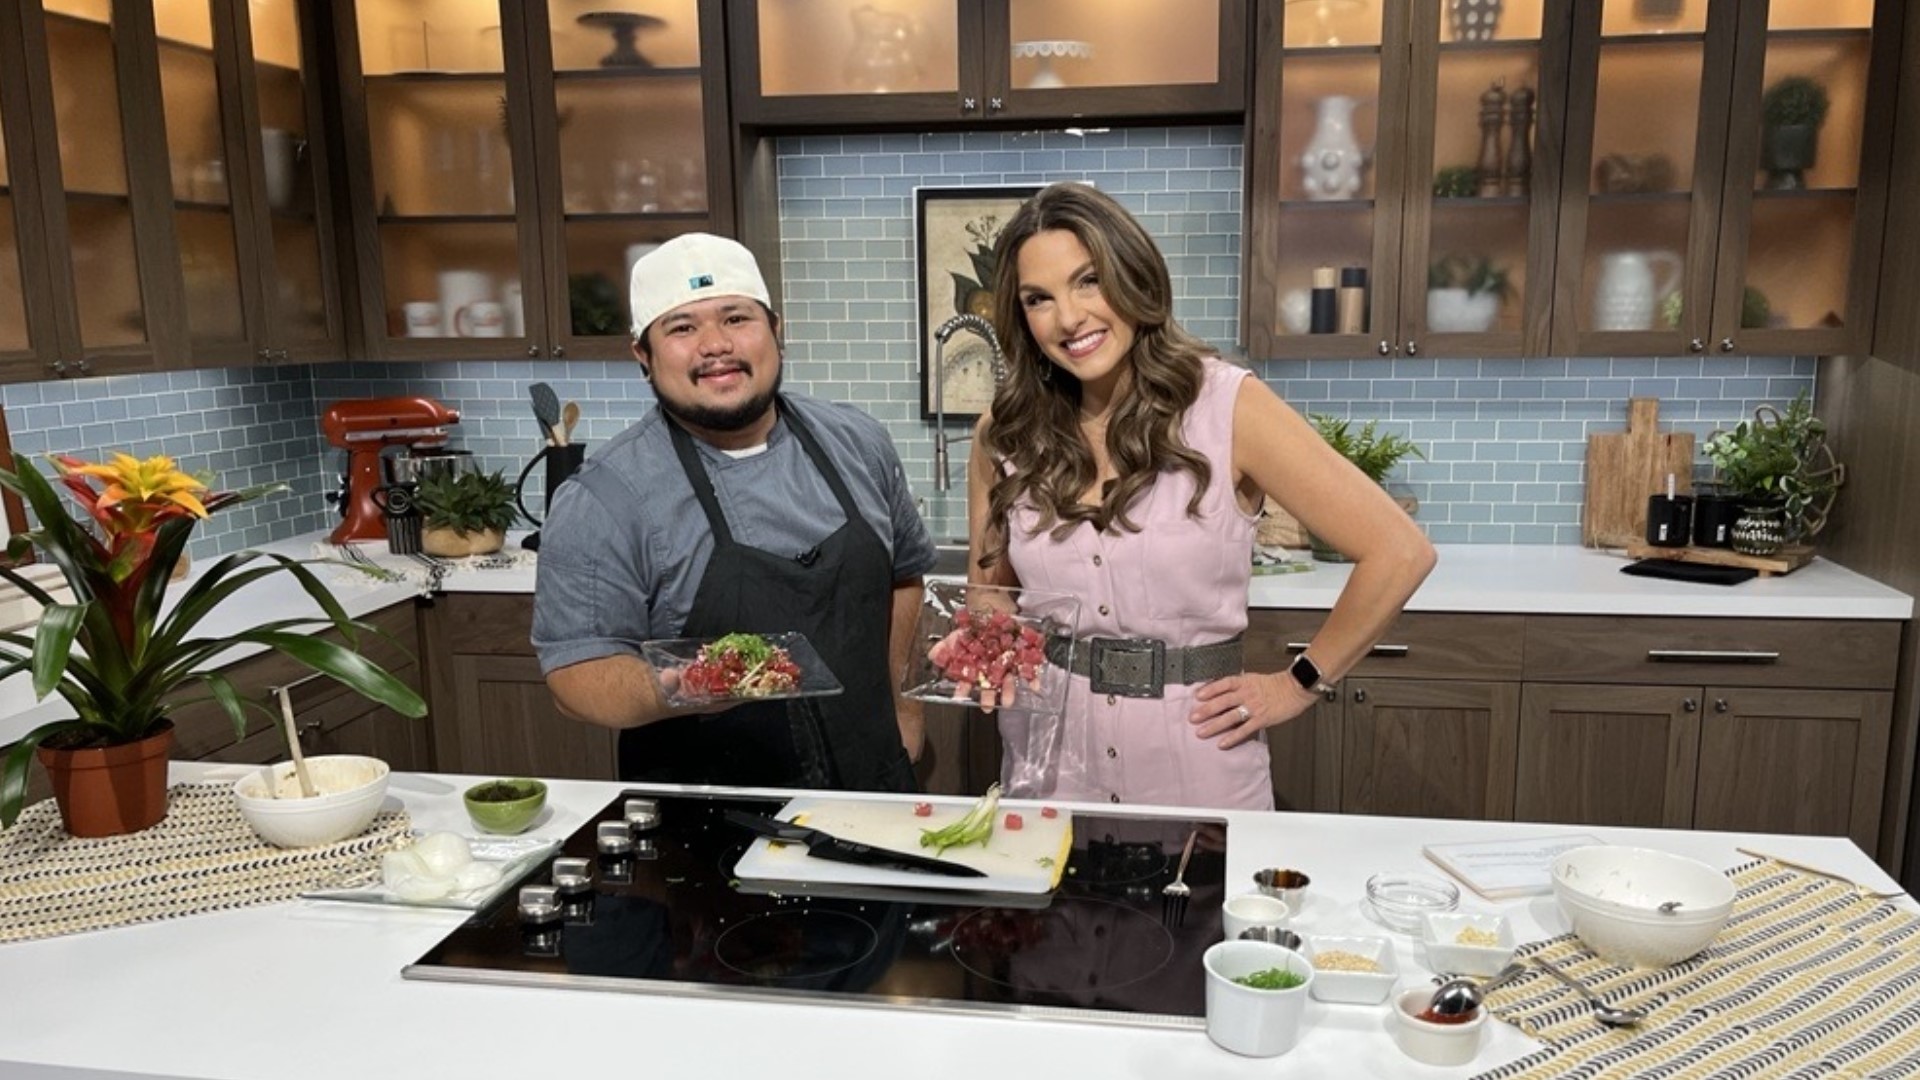 RJ Ogo from Saimin Says in Renton whips up a delicious traditional Hawaiian poke dish and discusses the Maui wildfires with Amity.